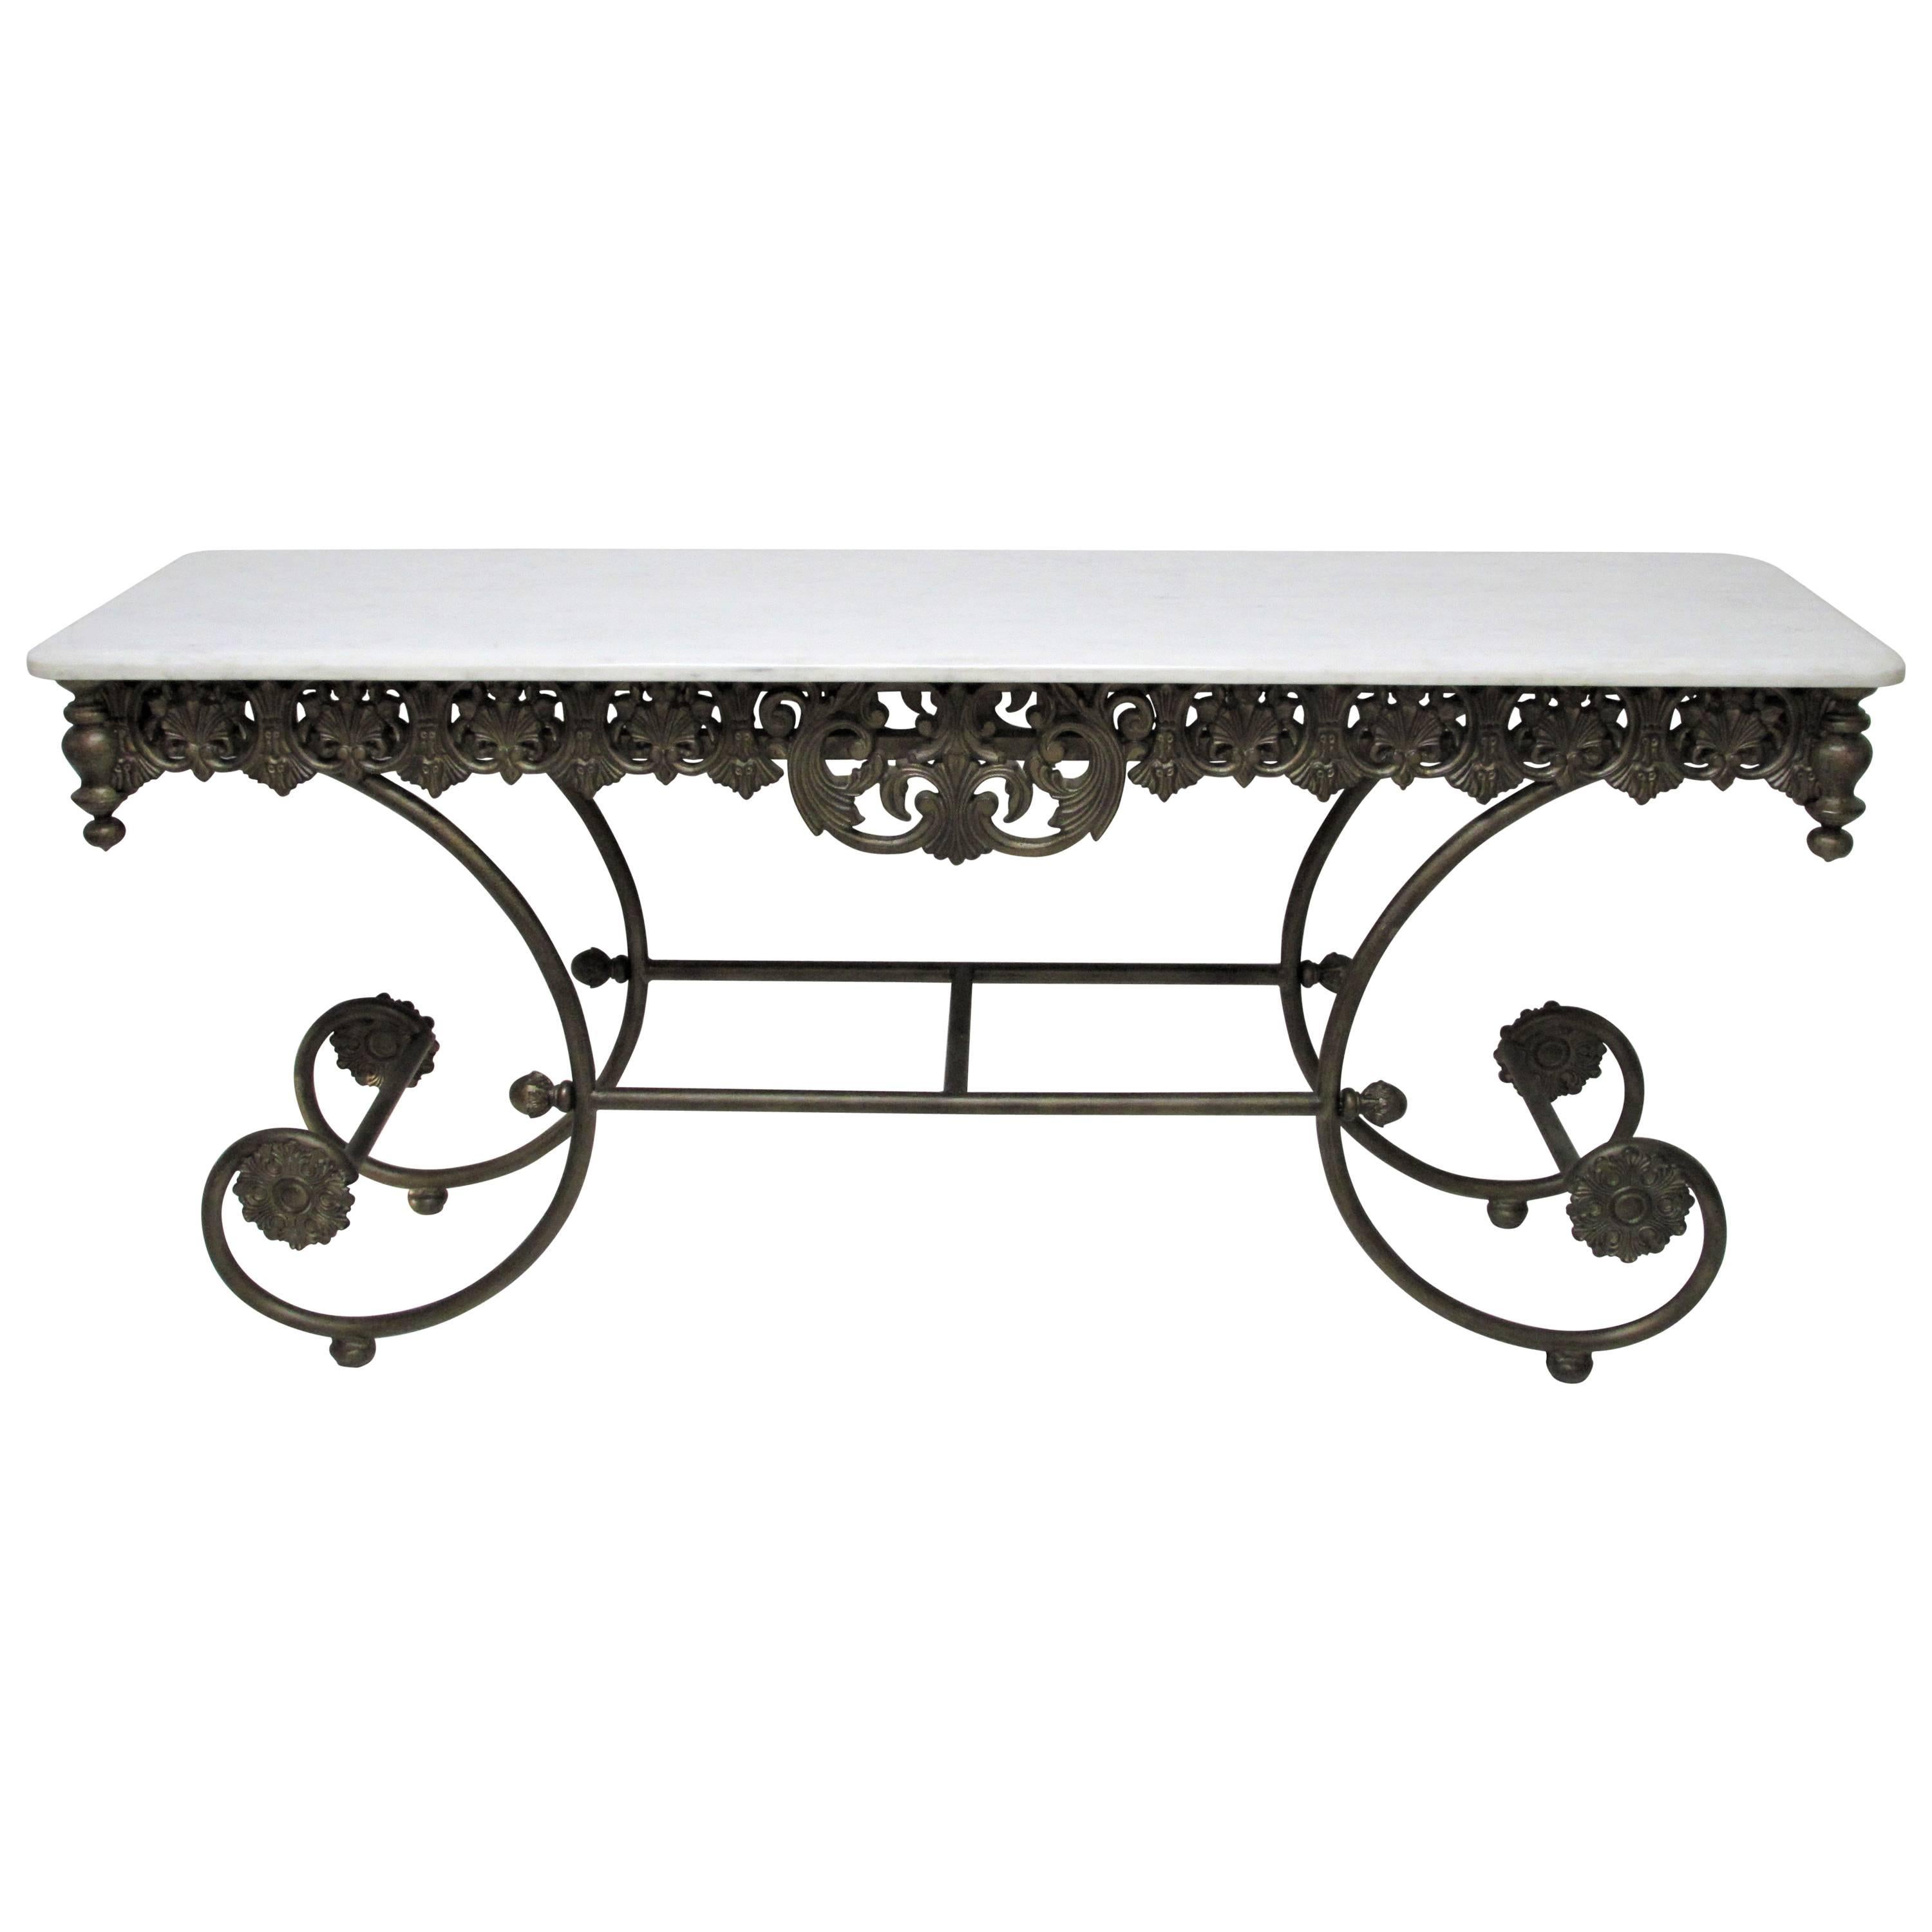 Stunning Drexel Heritage Belle Maison Console Table